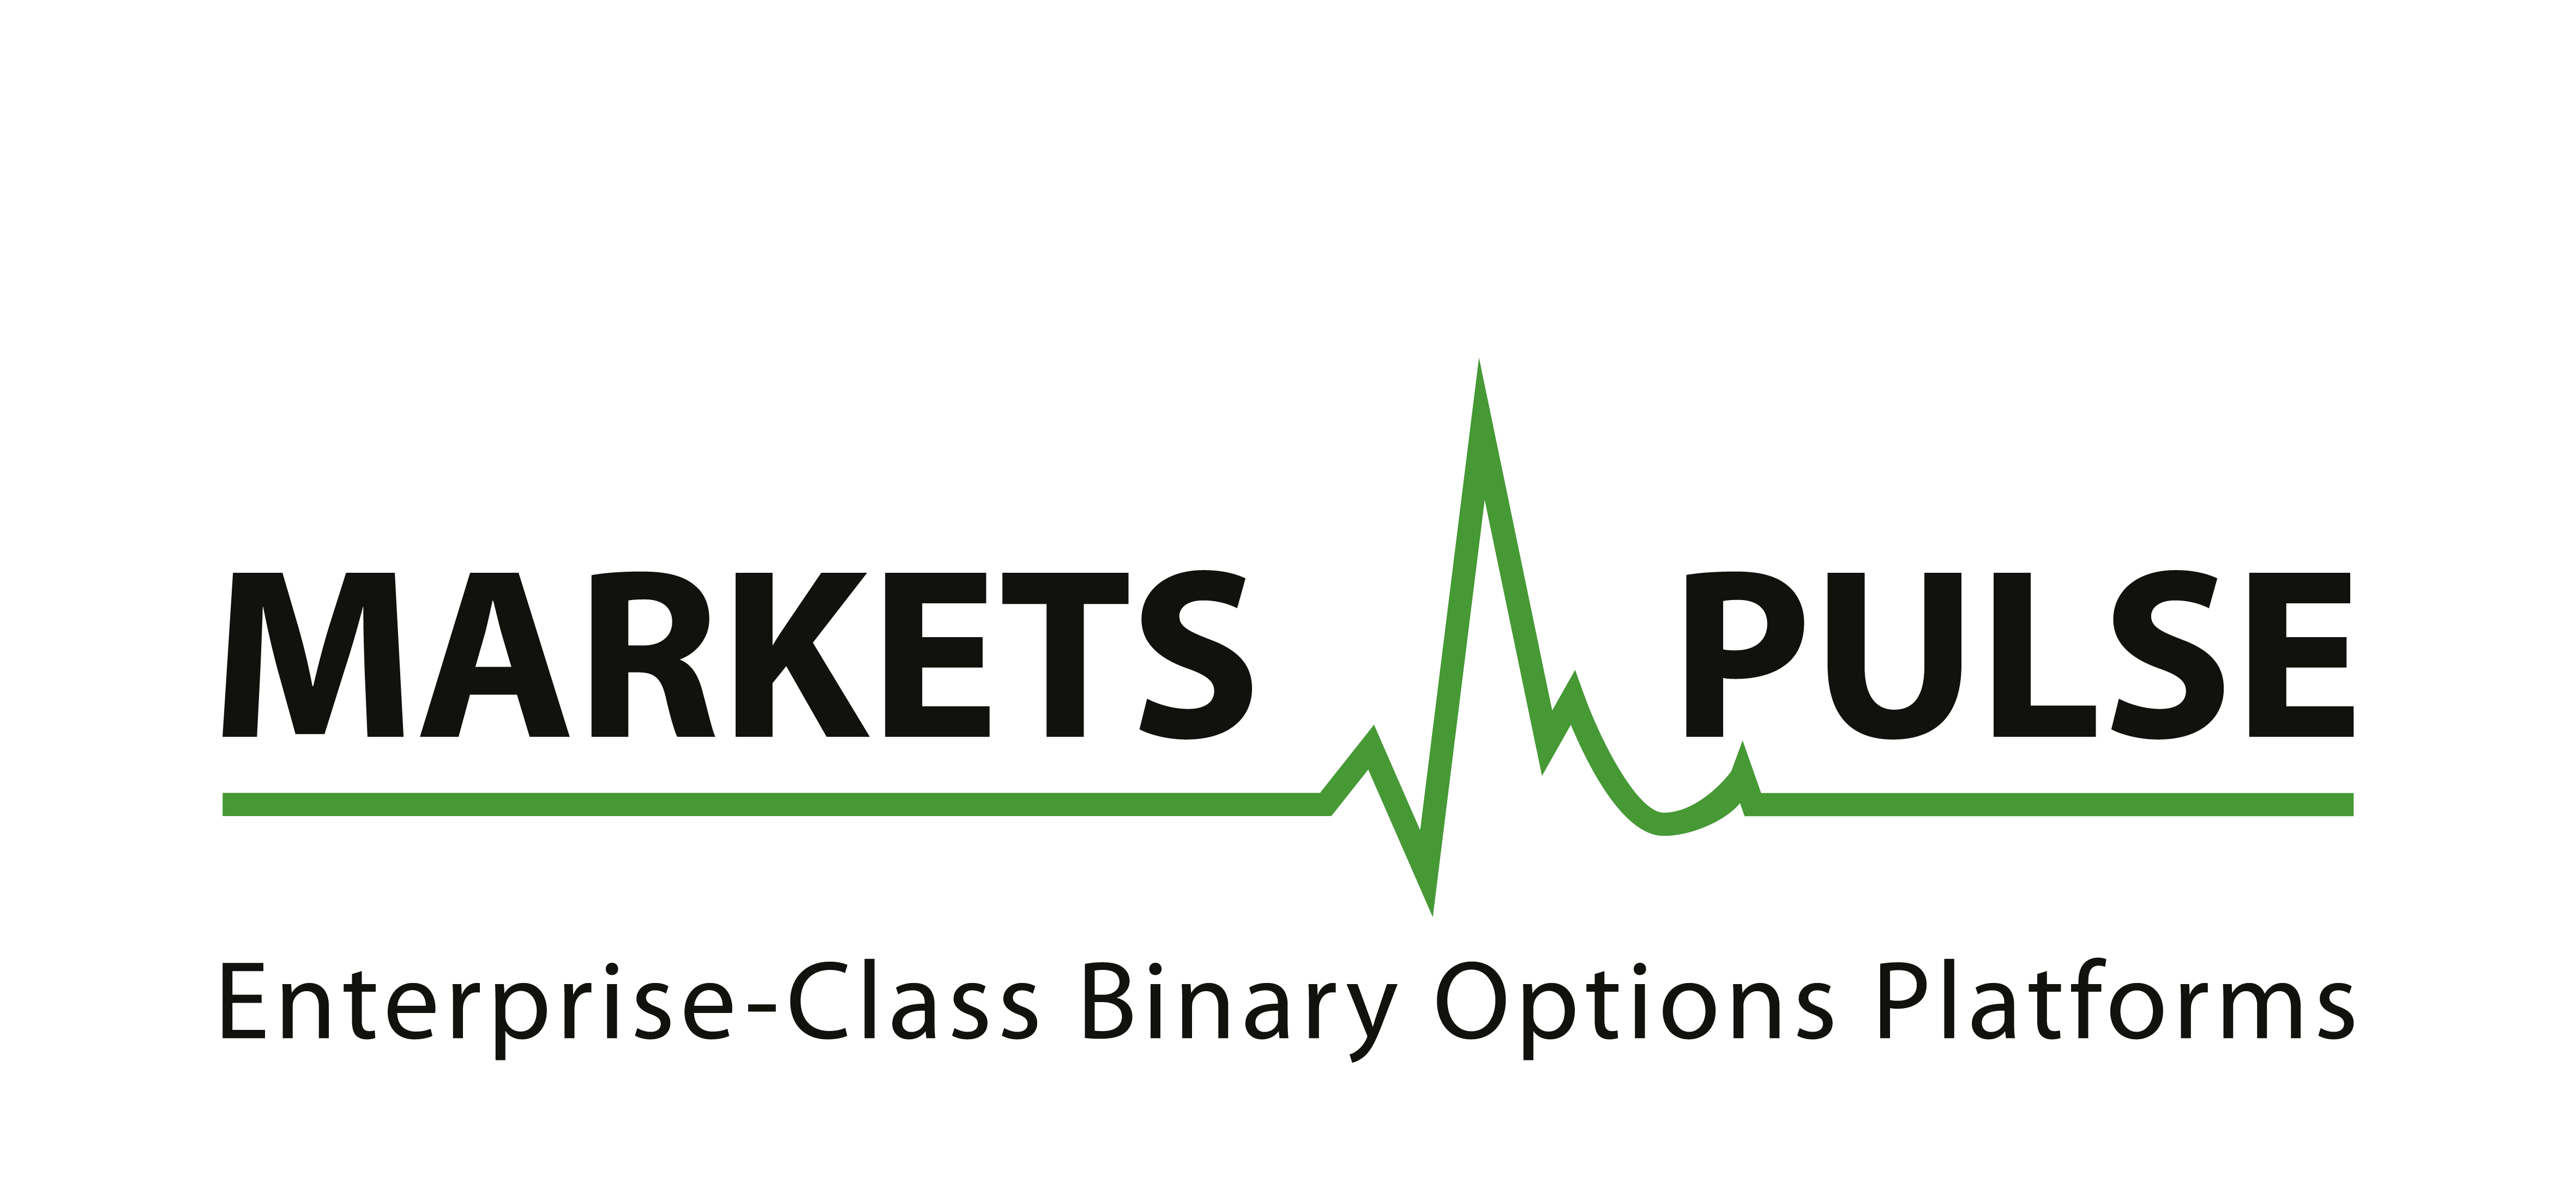 Binary options brokers that accept us clients 2020